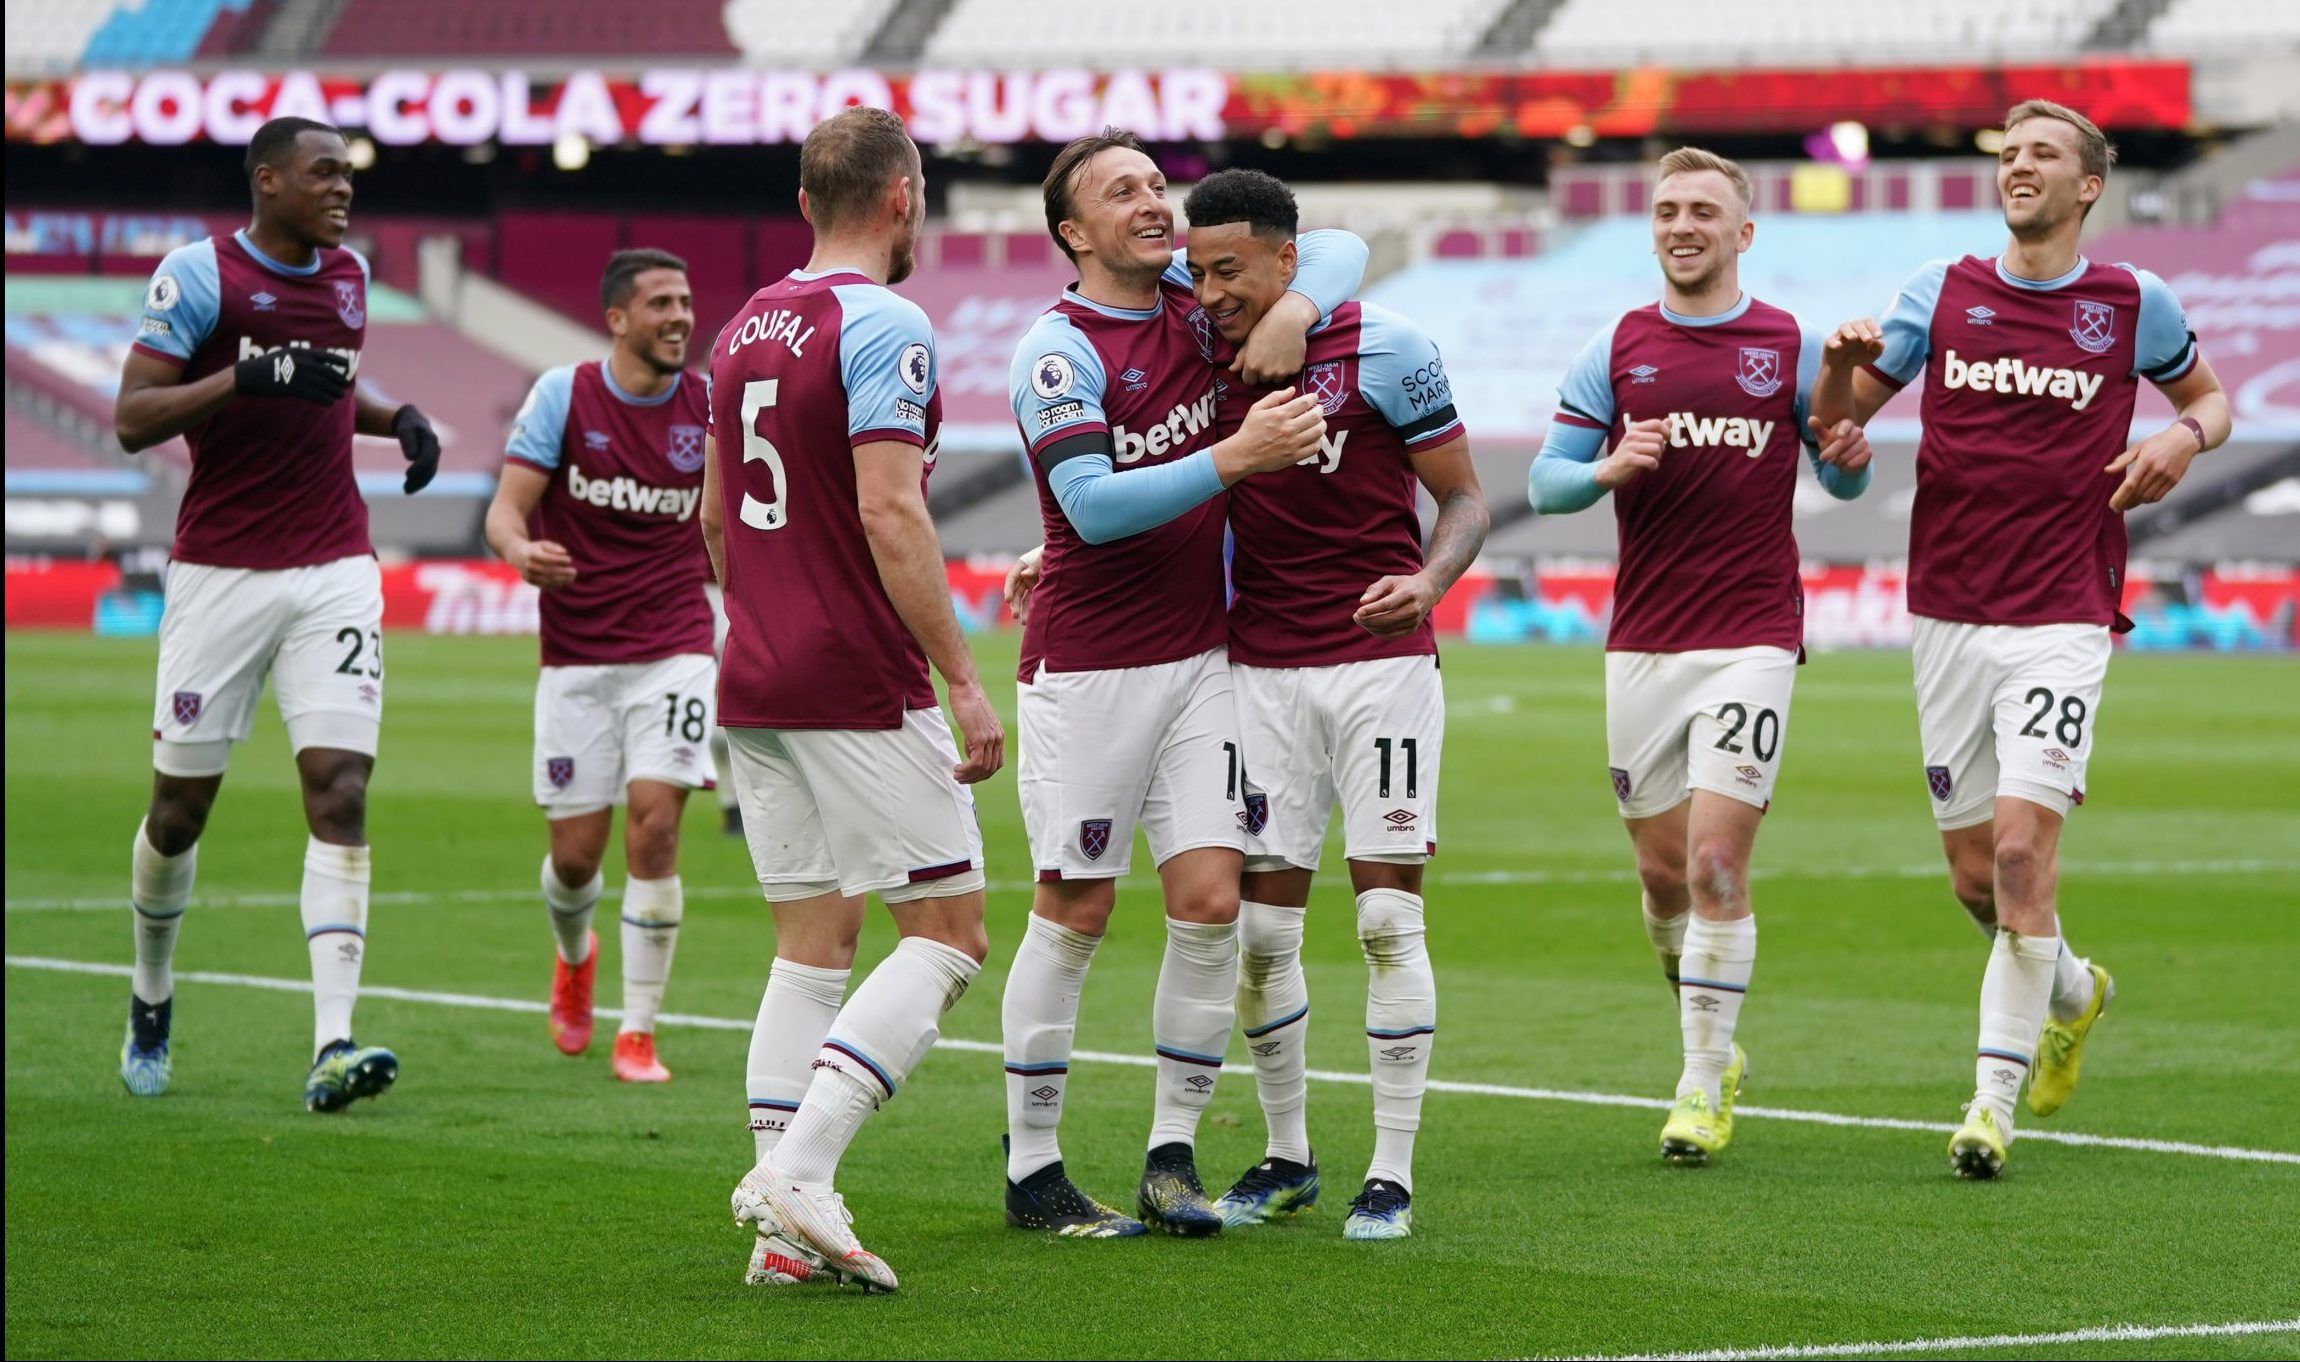 west ham loanee jesse lingard celebrates with teammates afte rscoring against leicester city in the premier league